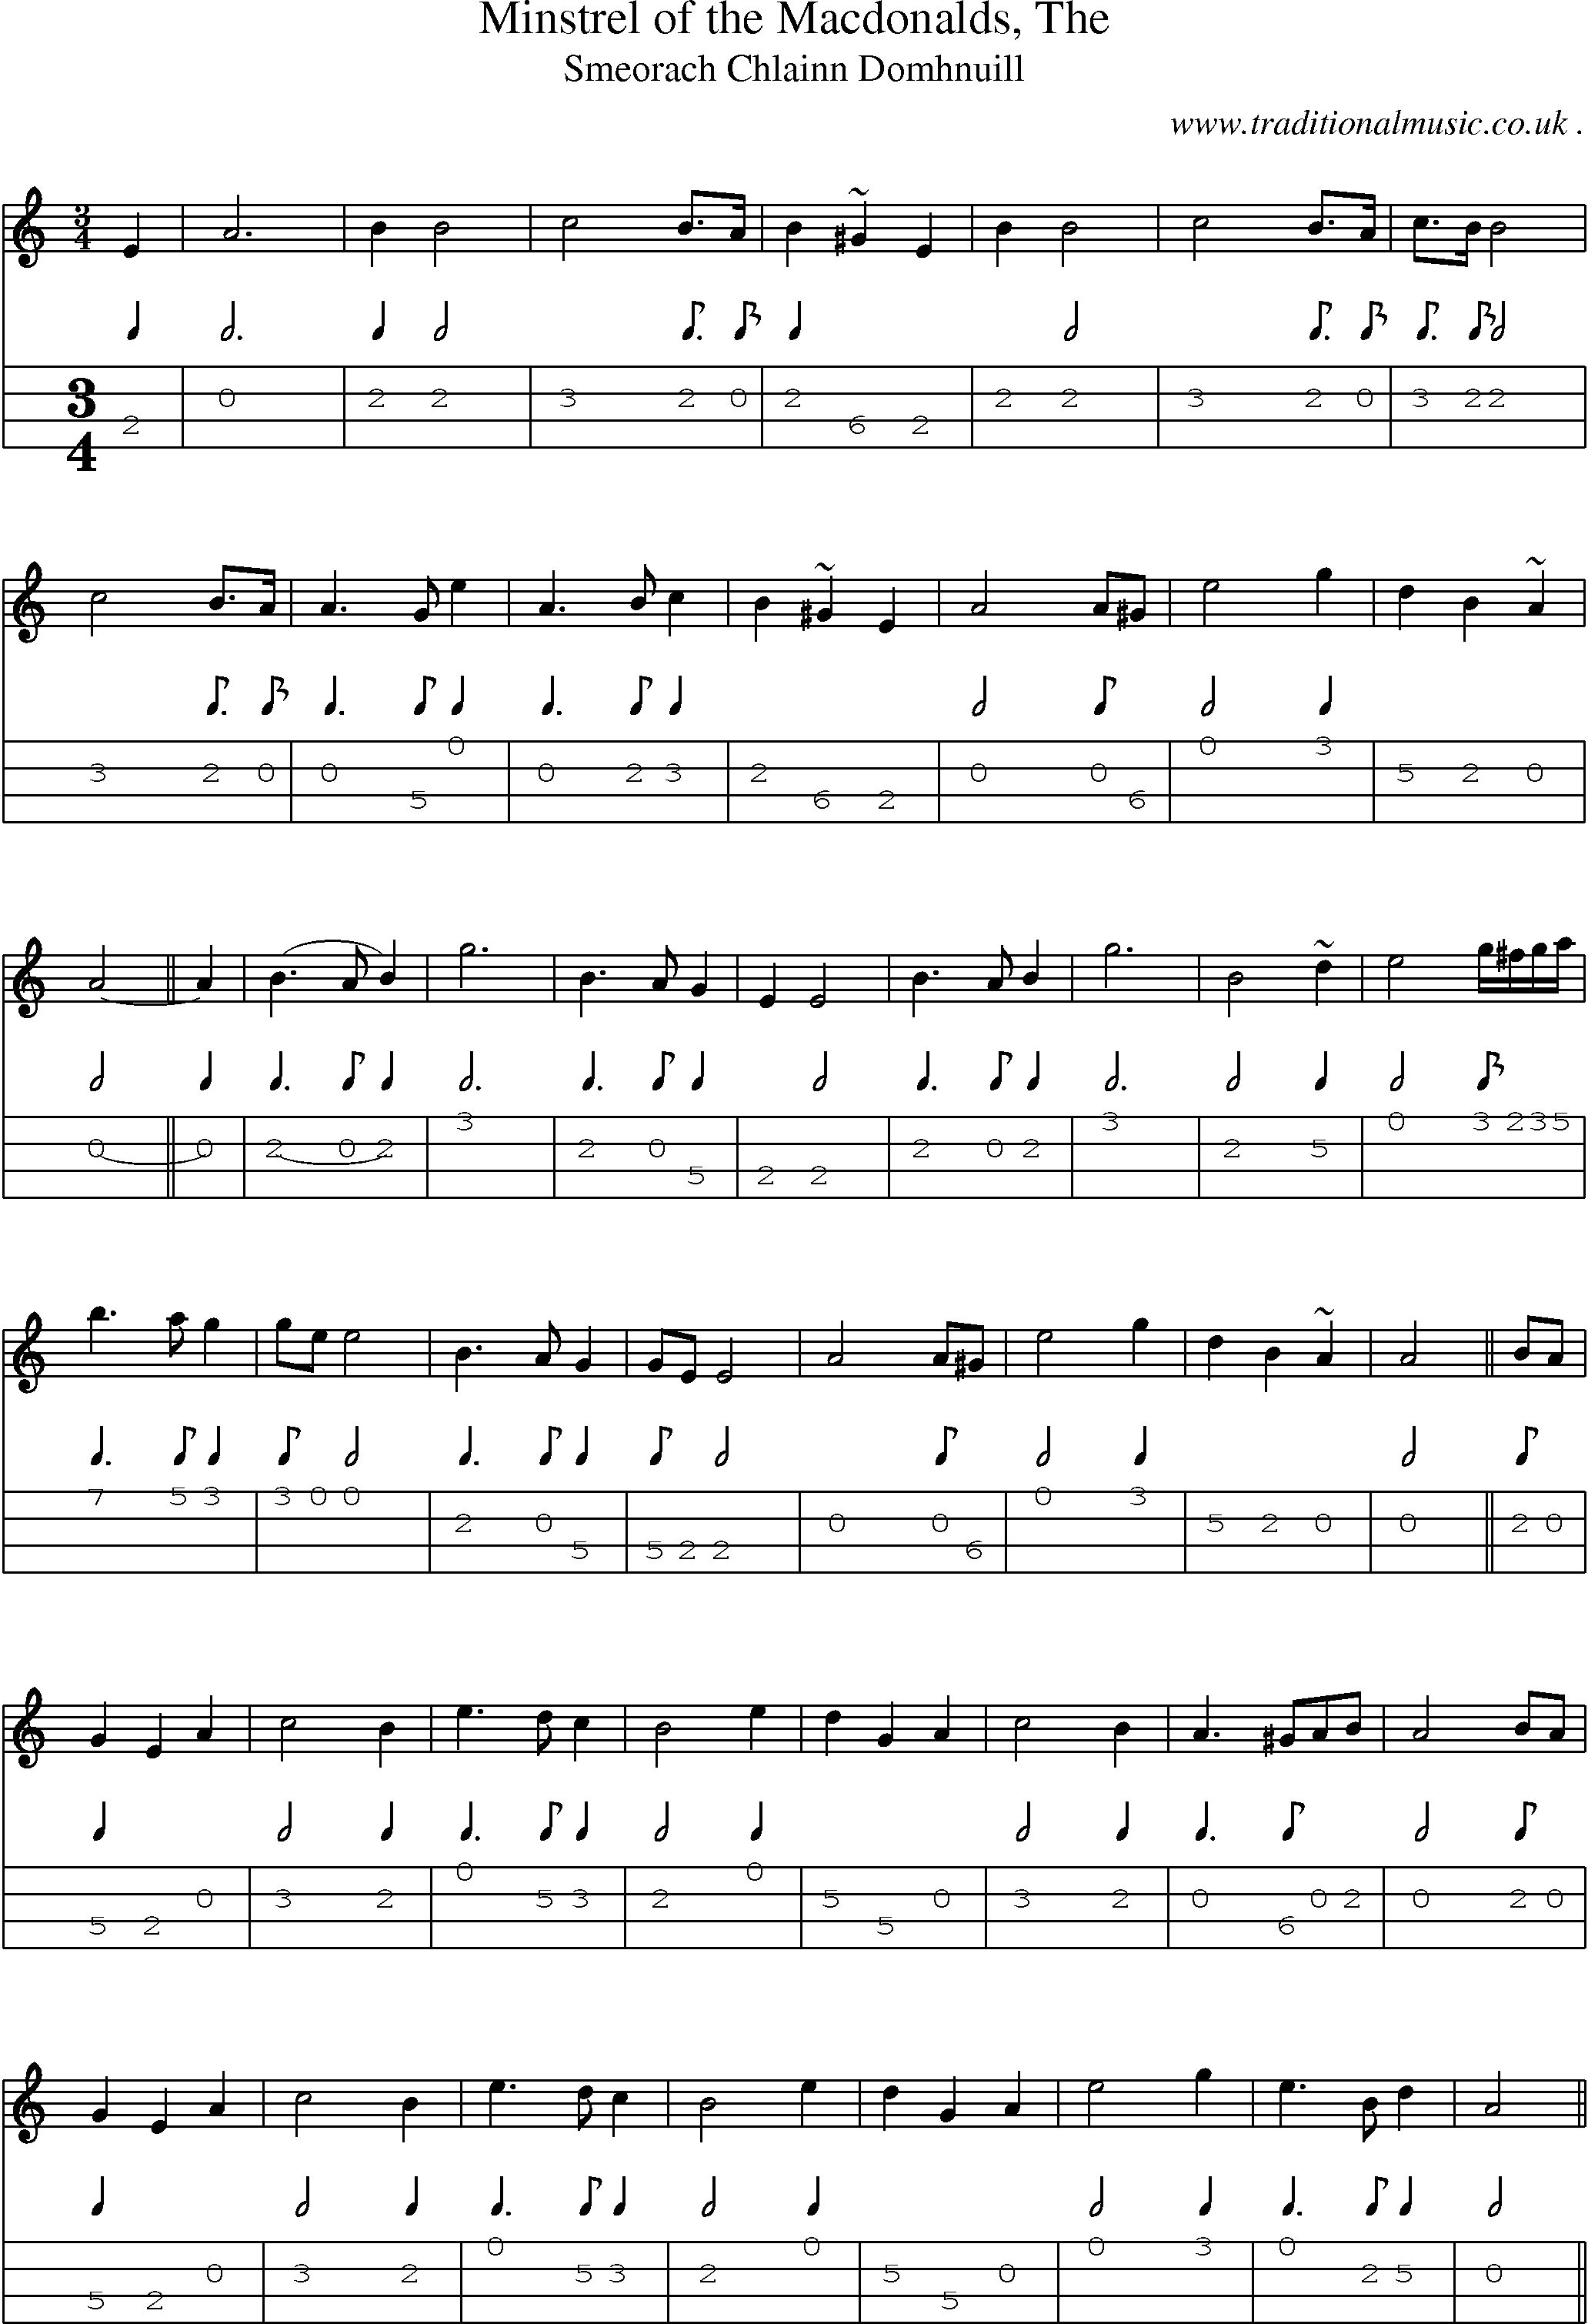 Sheet-music  score, Chords and Mandolin Tabs for Minstrel Of The Macdonalds The